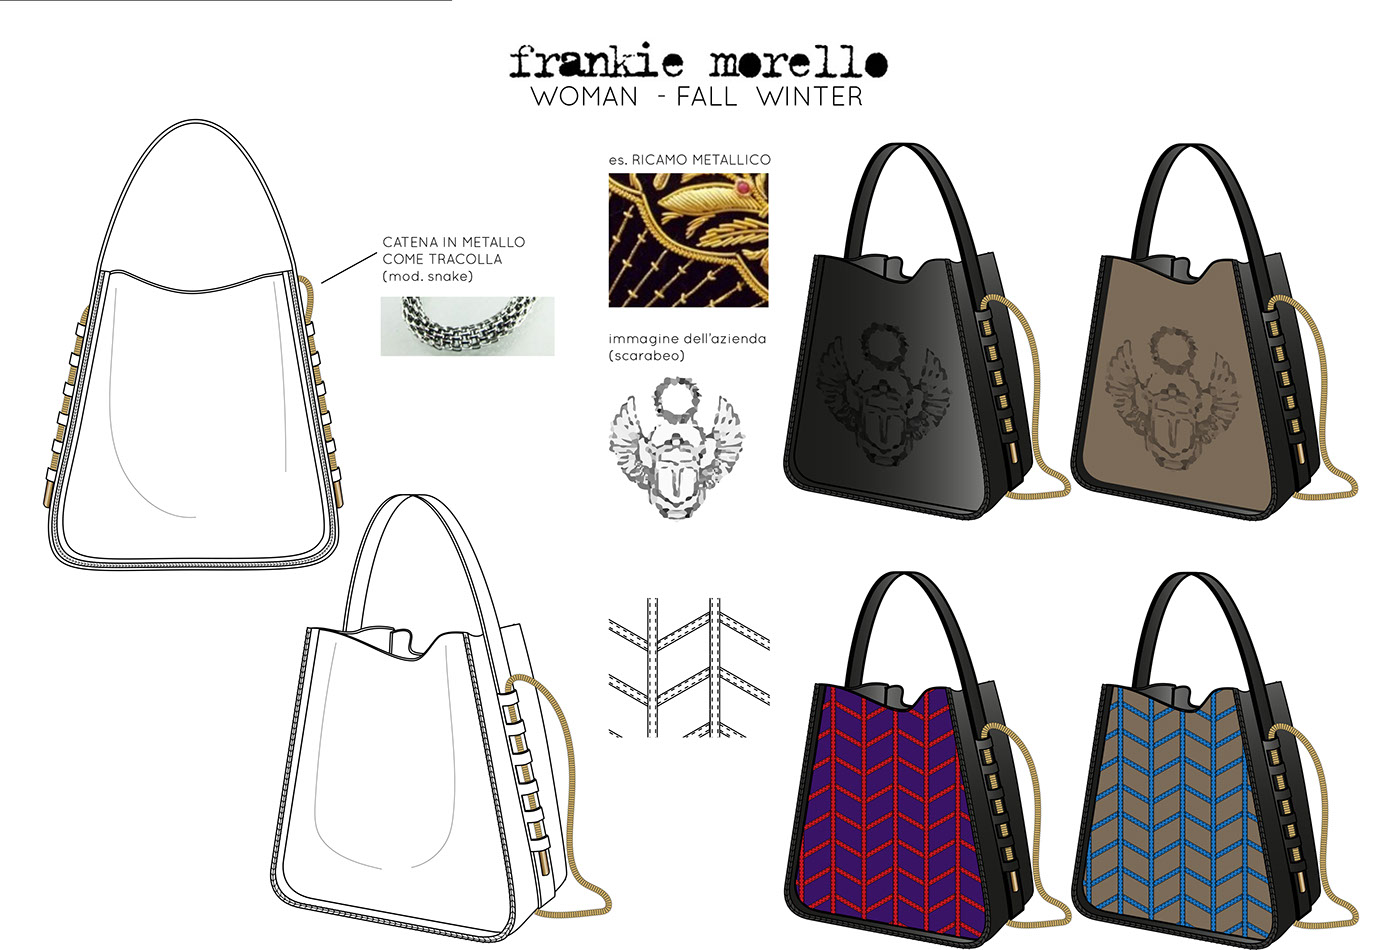 shoes women design bag purses Collection Fashion  frankie morello made in italy accessories